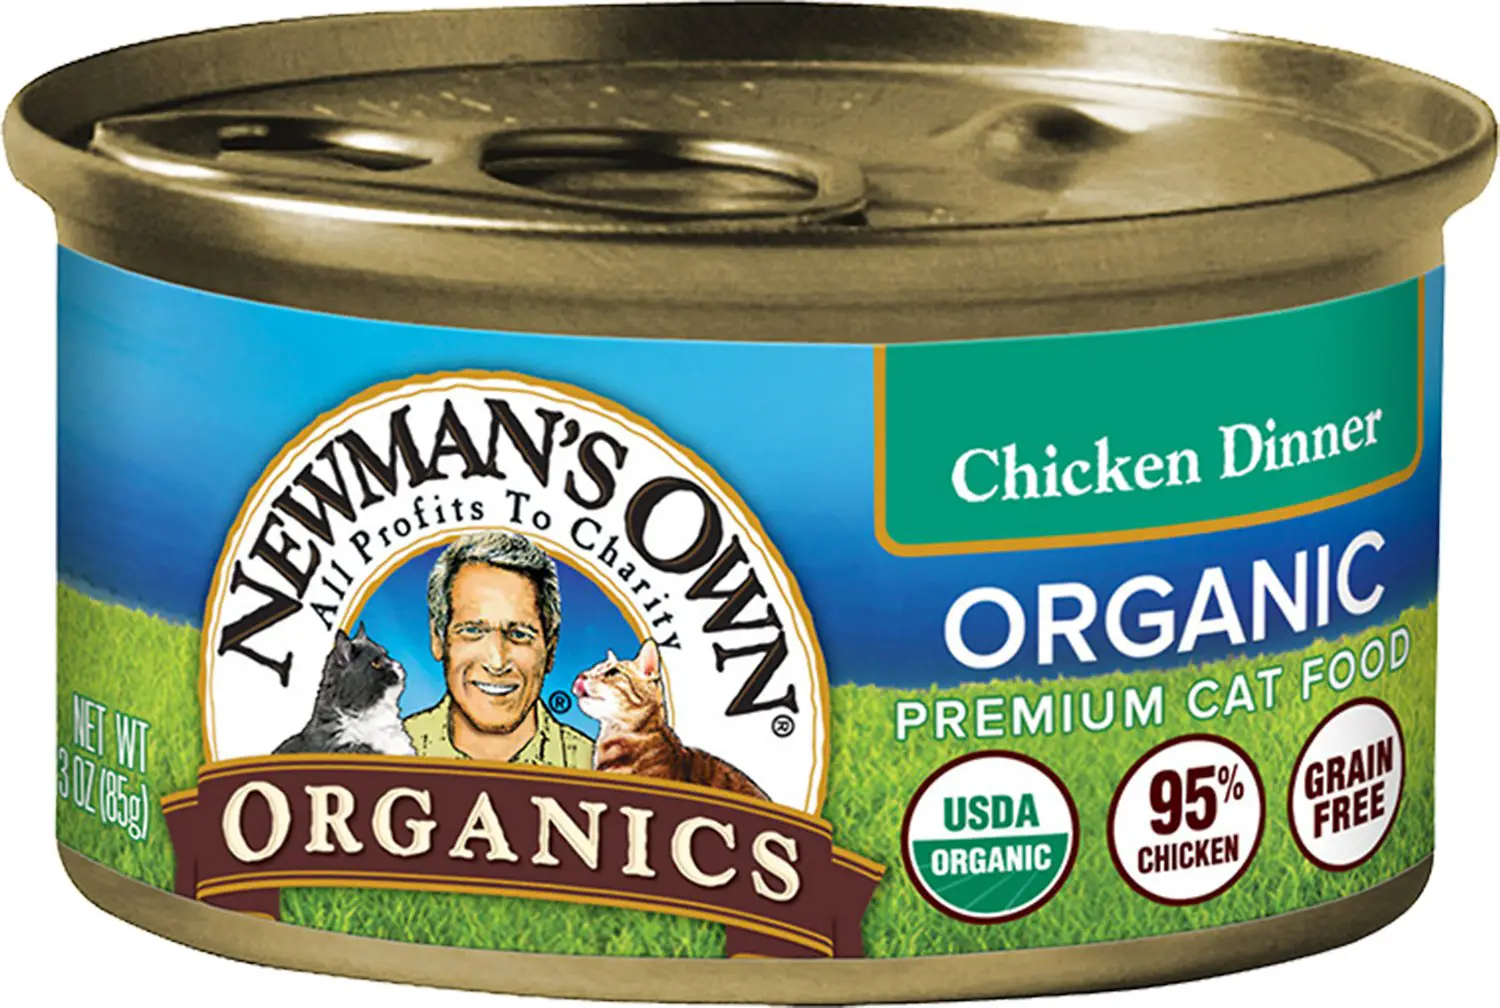 Newman’s Own Organics Canned Cat Food: Review